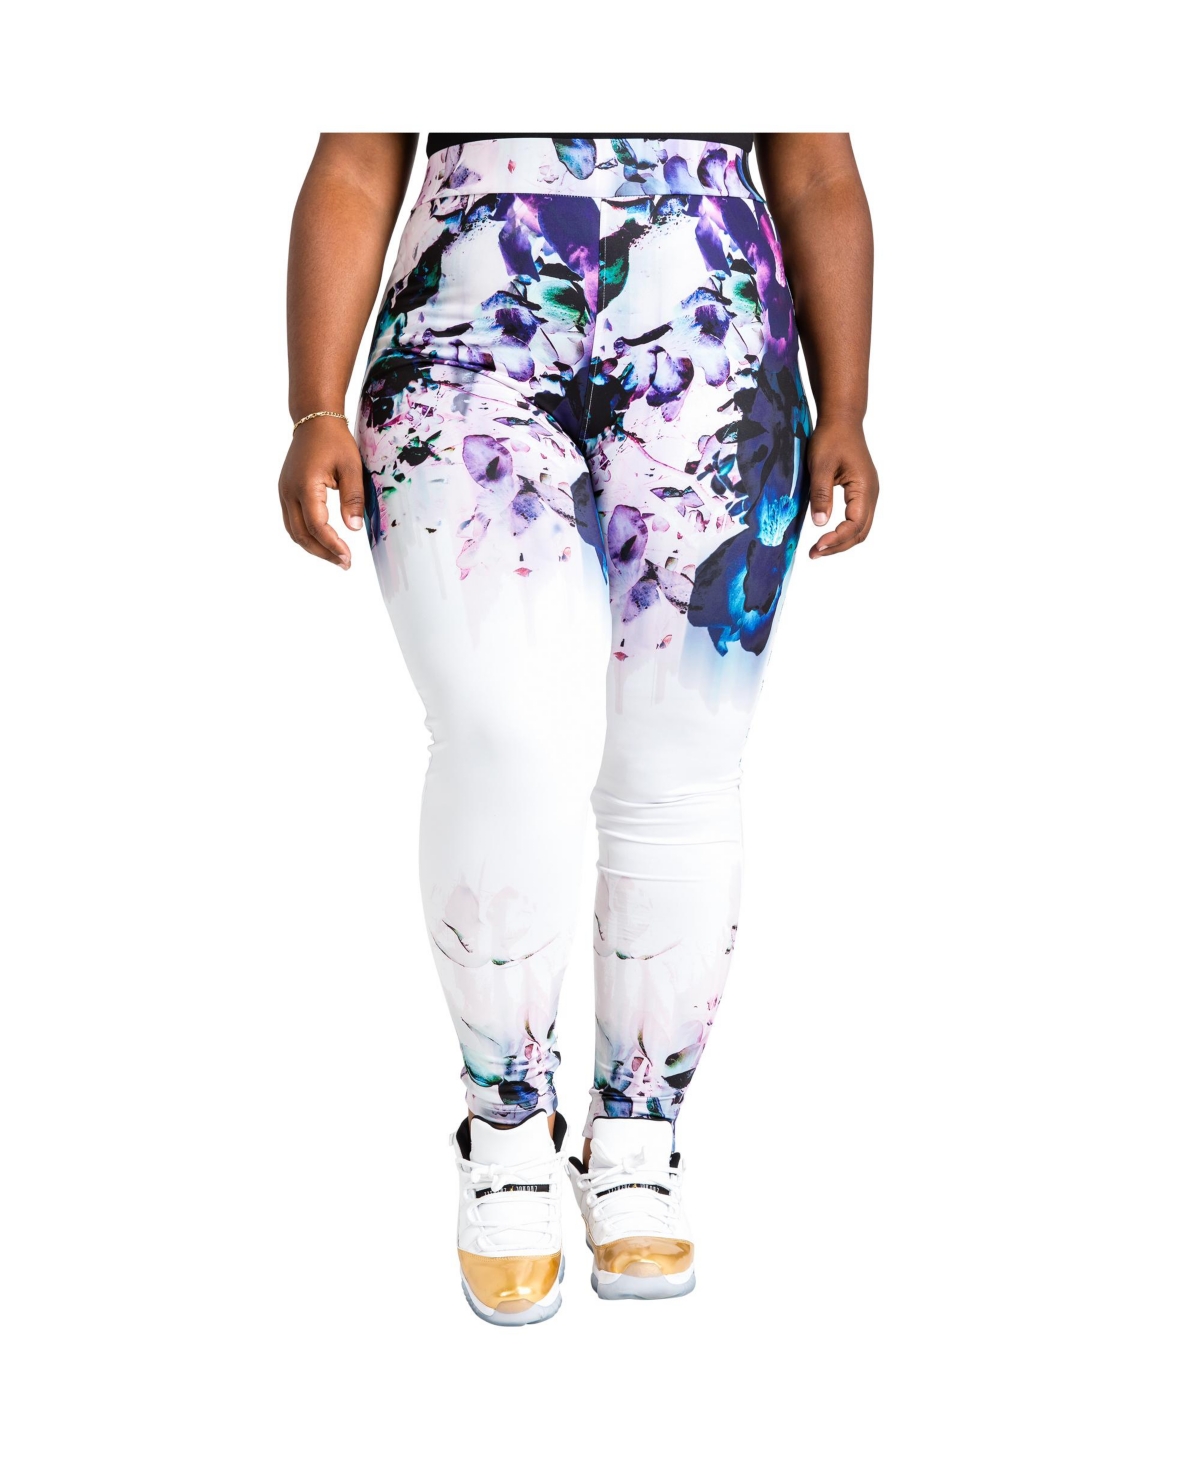 Poetic Justice Plus Size Curvy Women's Lace Insets Pull On Ponte Legging